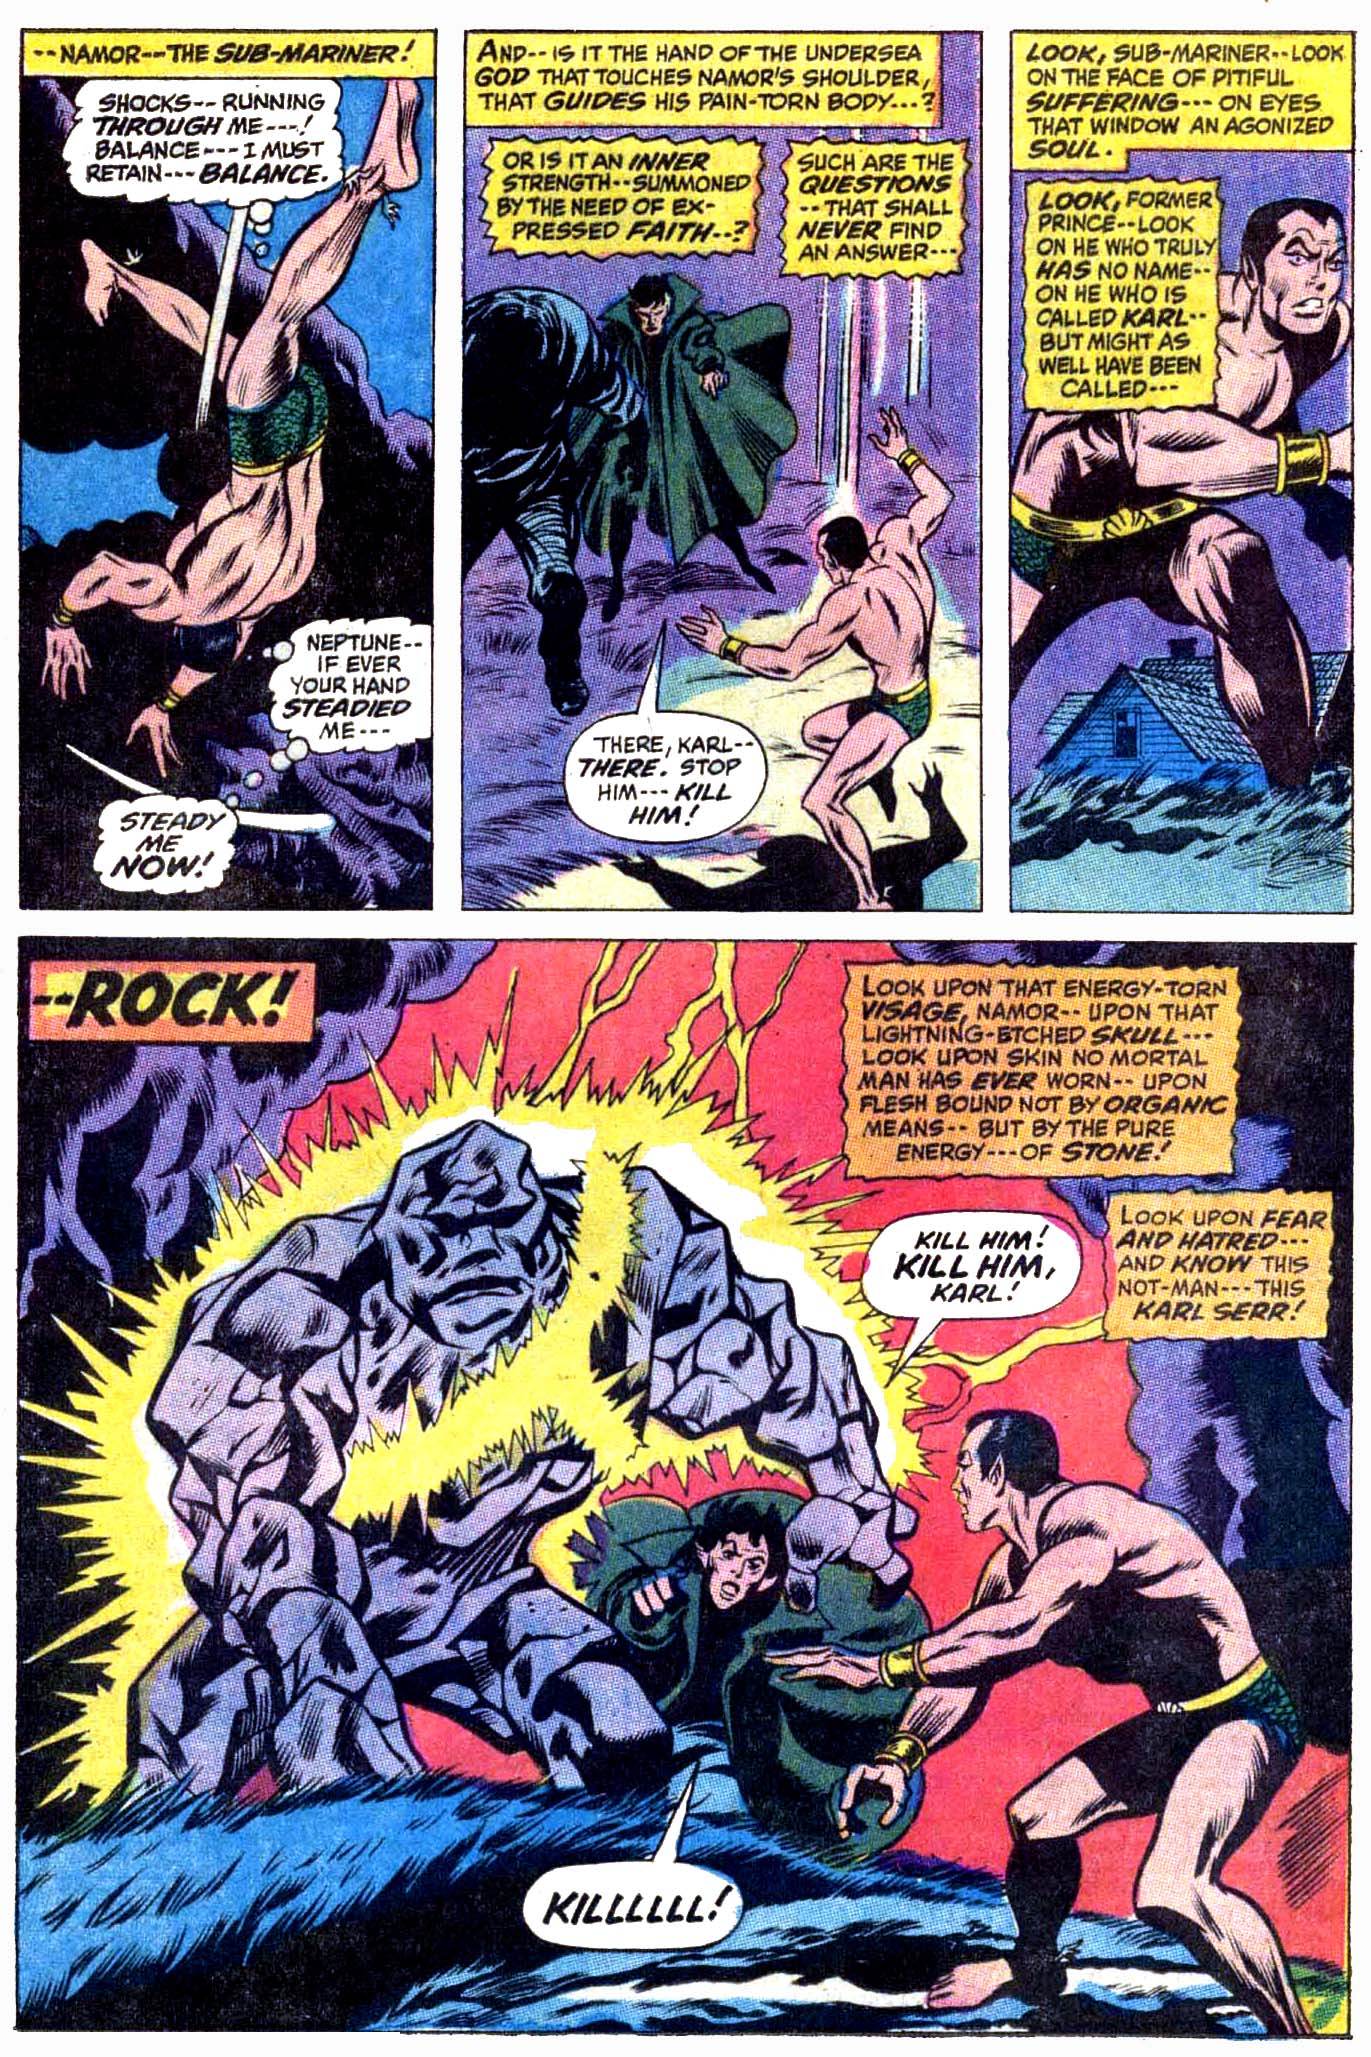 Read online The Sub-Mariner comic -  Issue #41 - 11